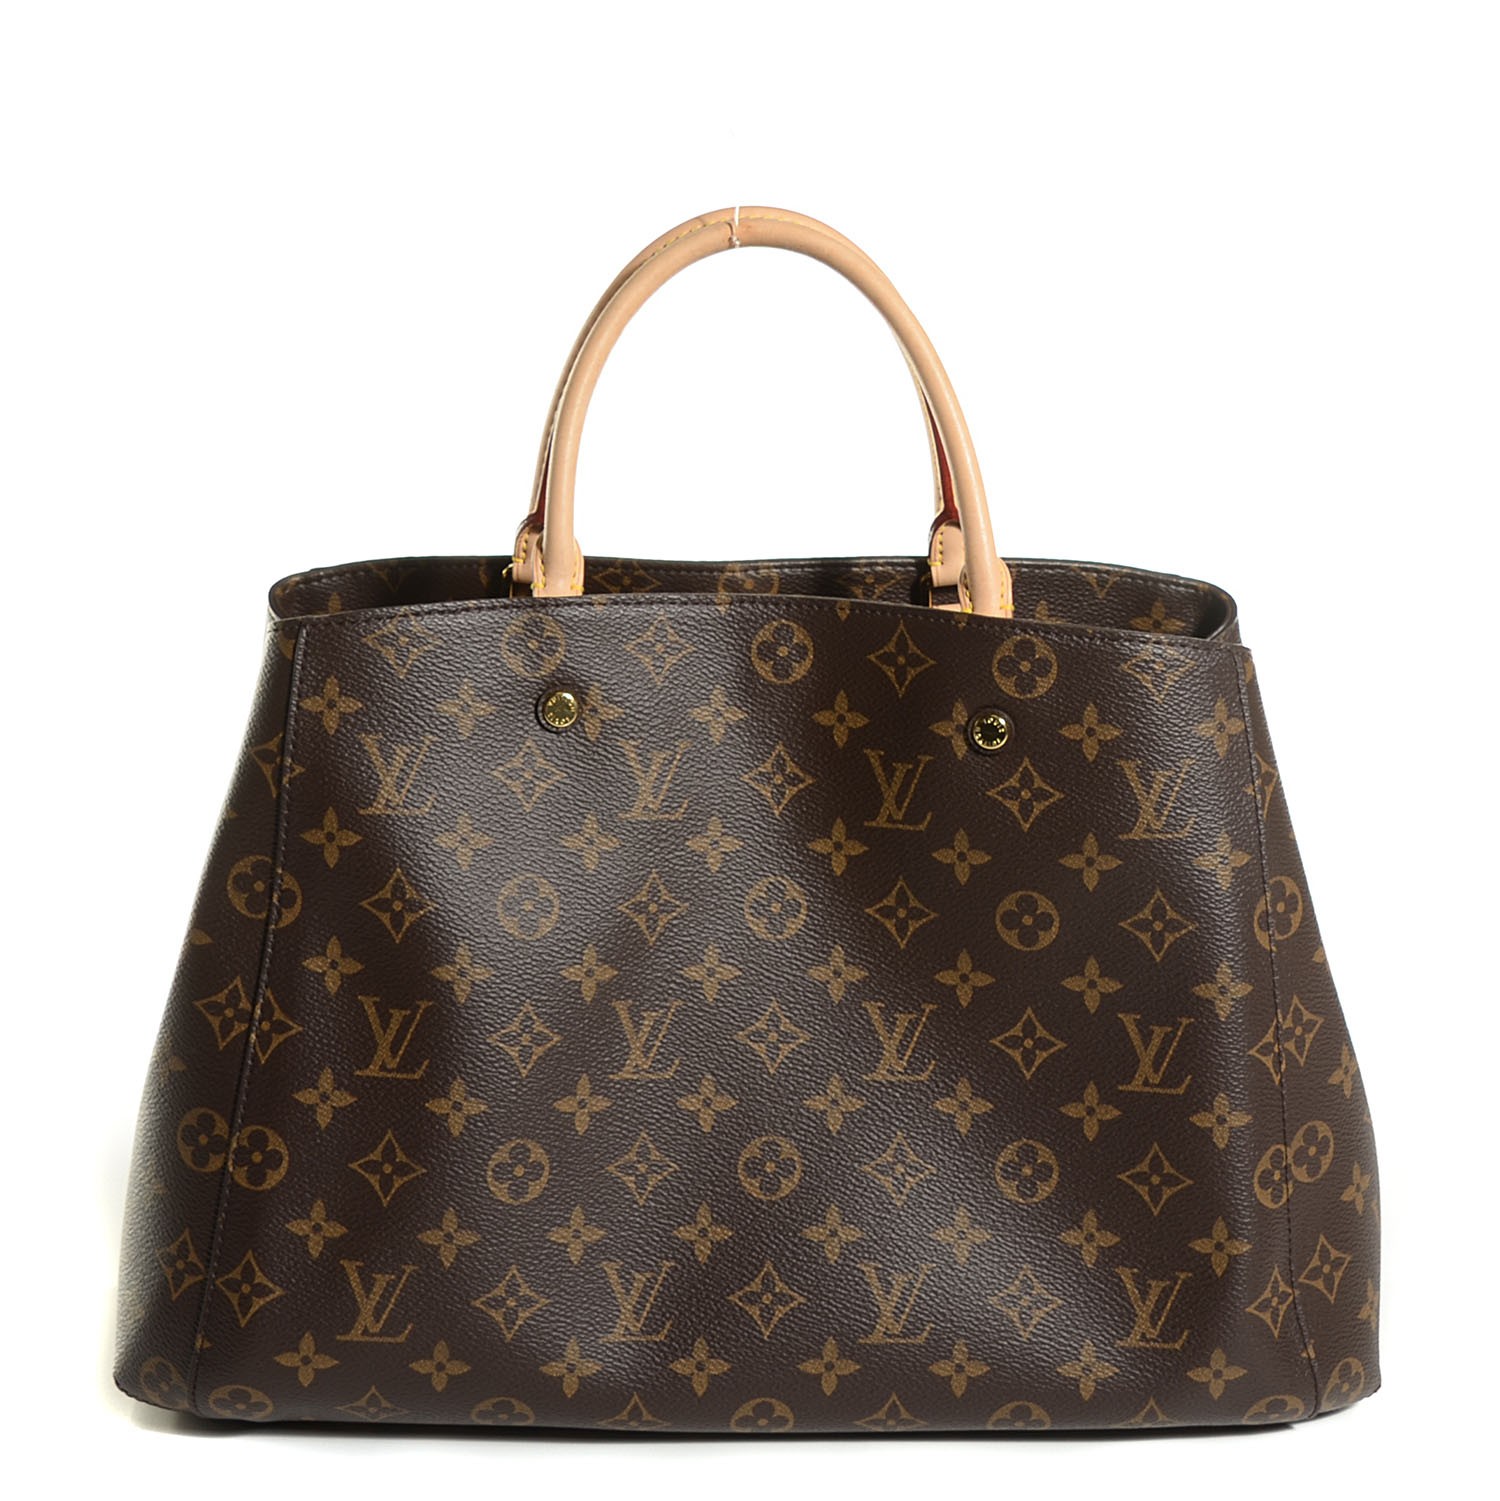 Louis Vuitton Artsy Bag Reference Guide - Spotted Fashion